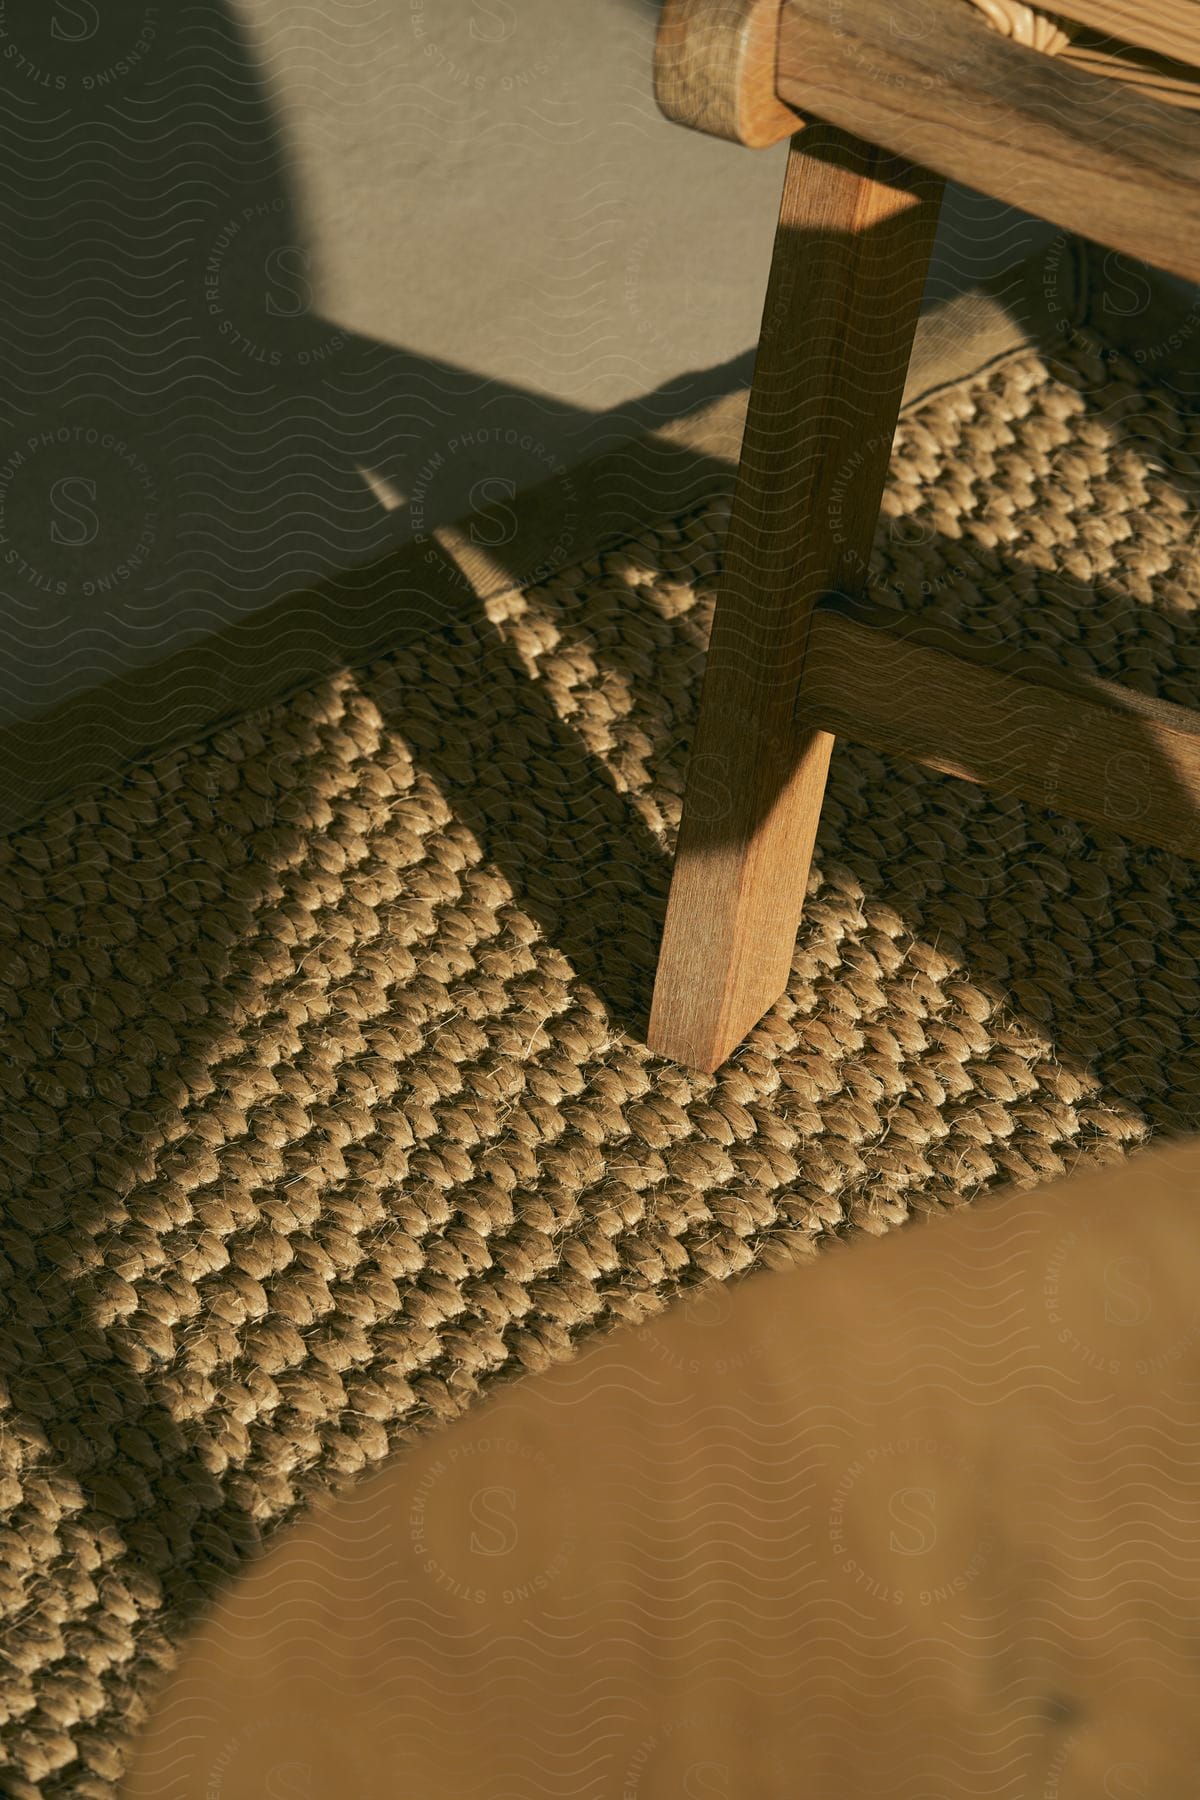 A view of some chairs in a room on carpet.